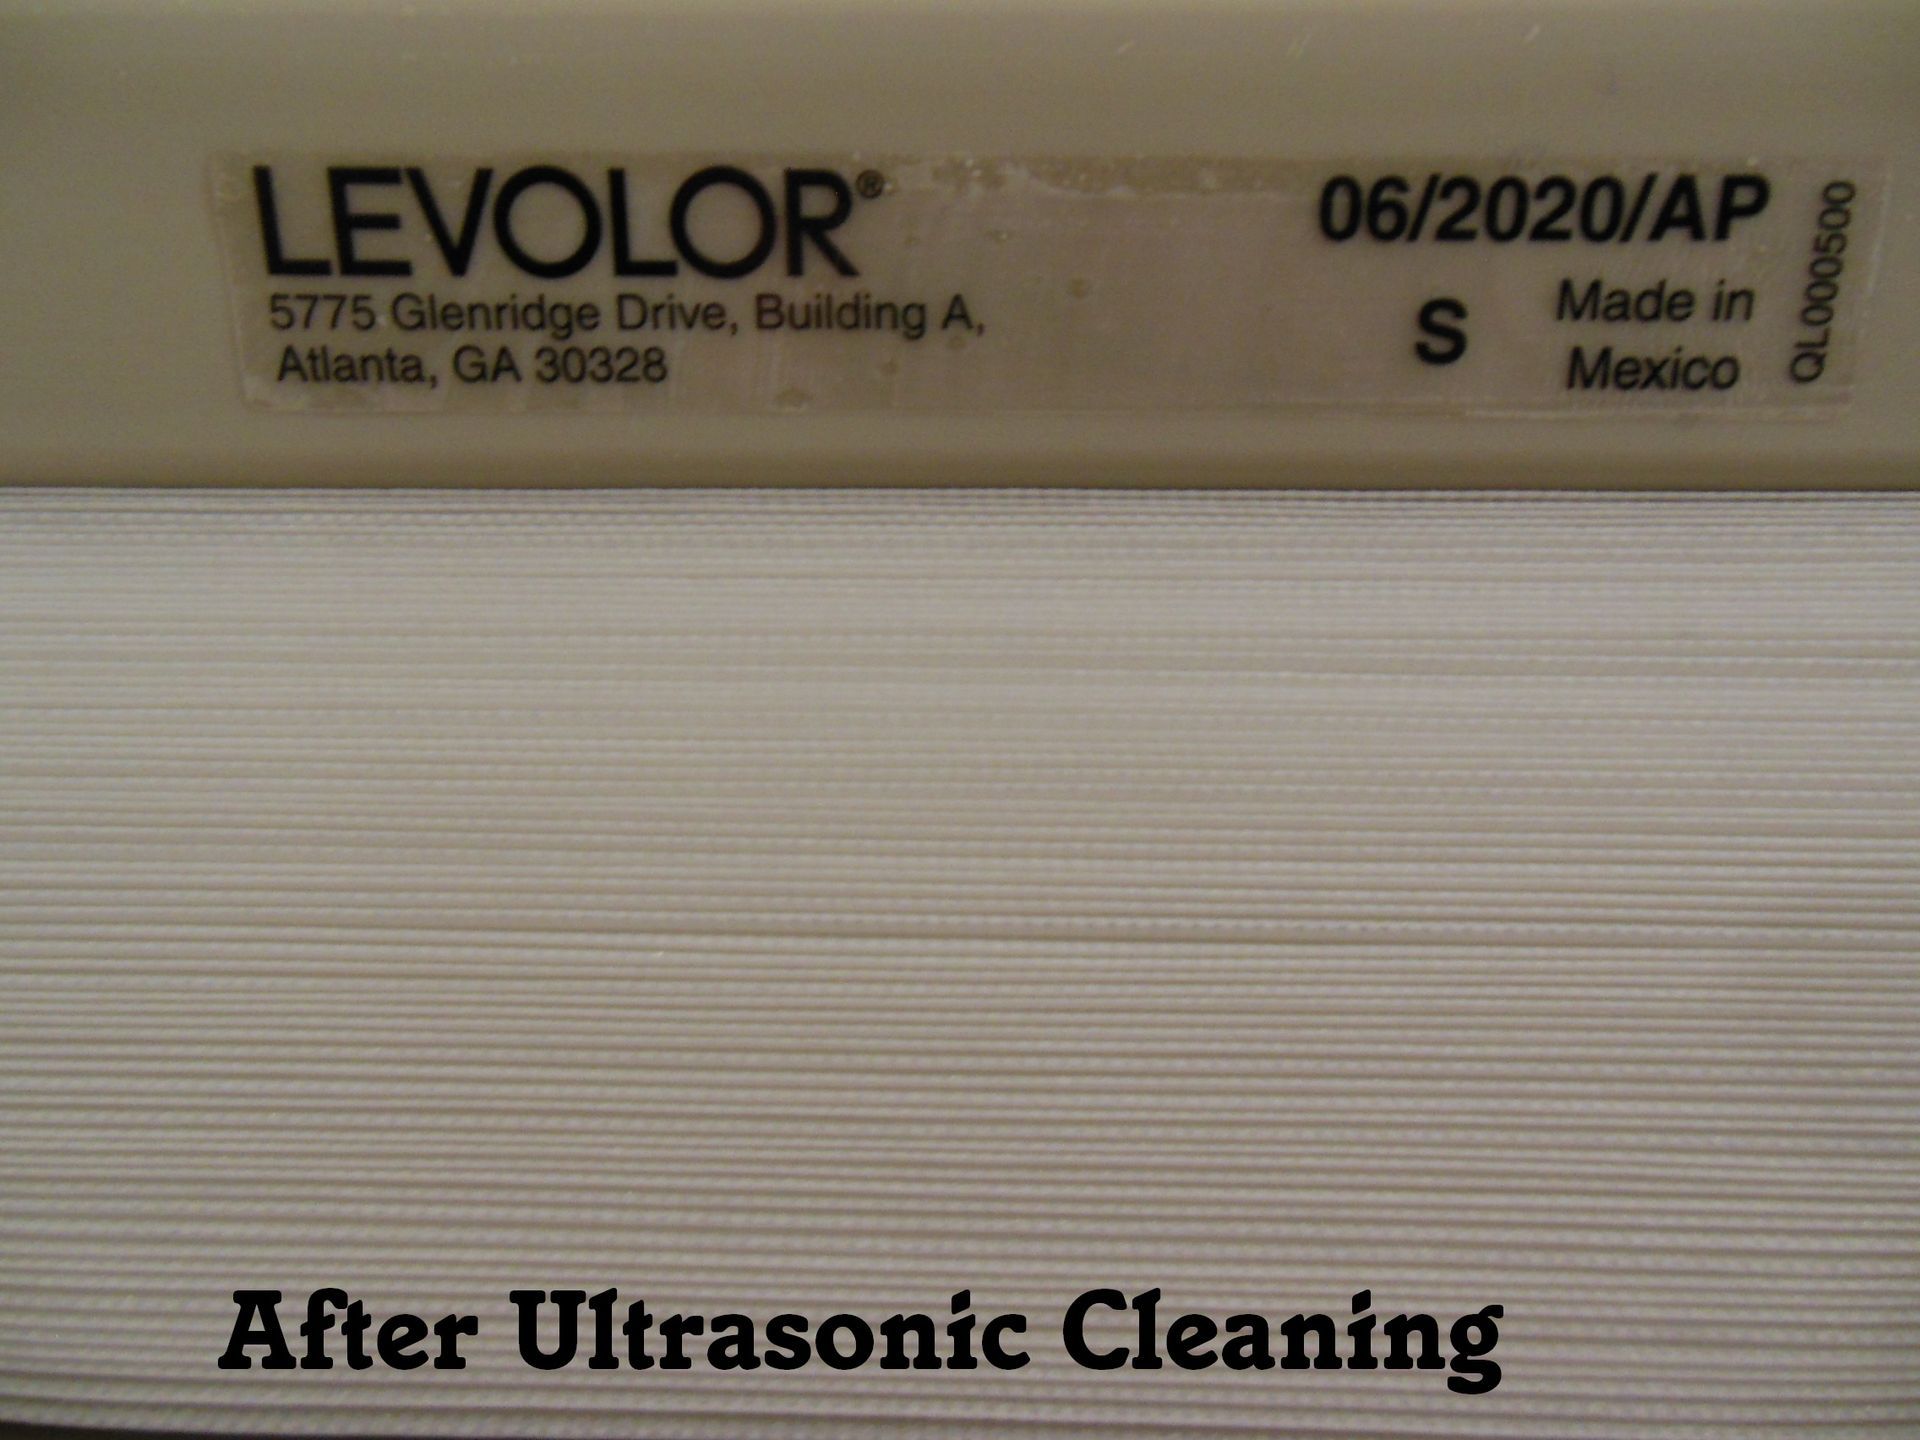 After Ultrasonic Cleaning